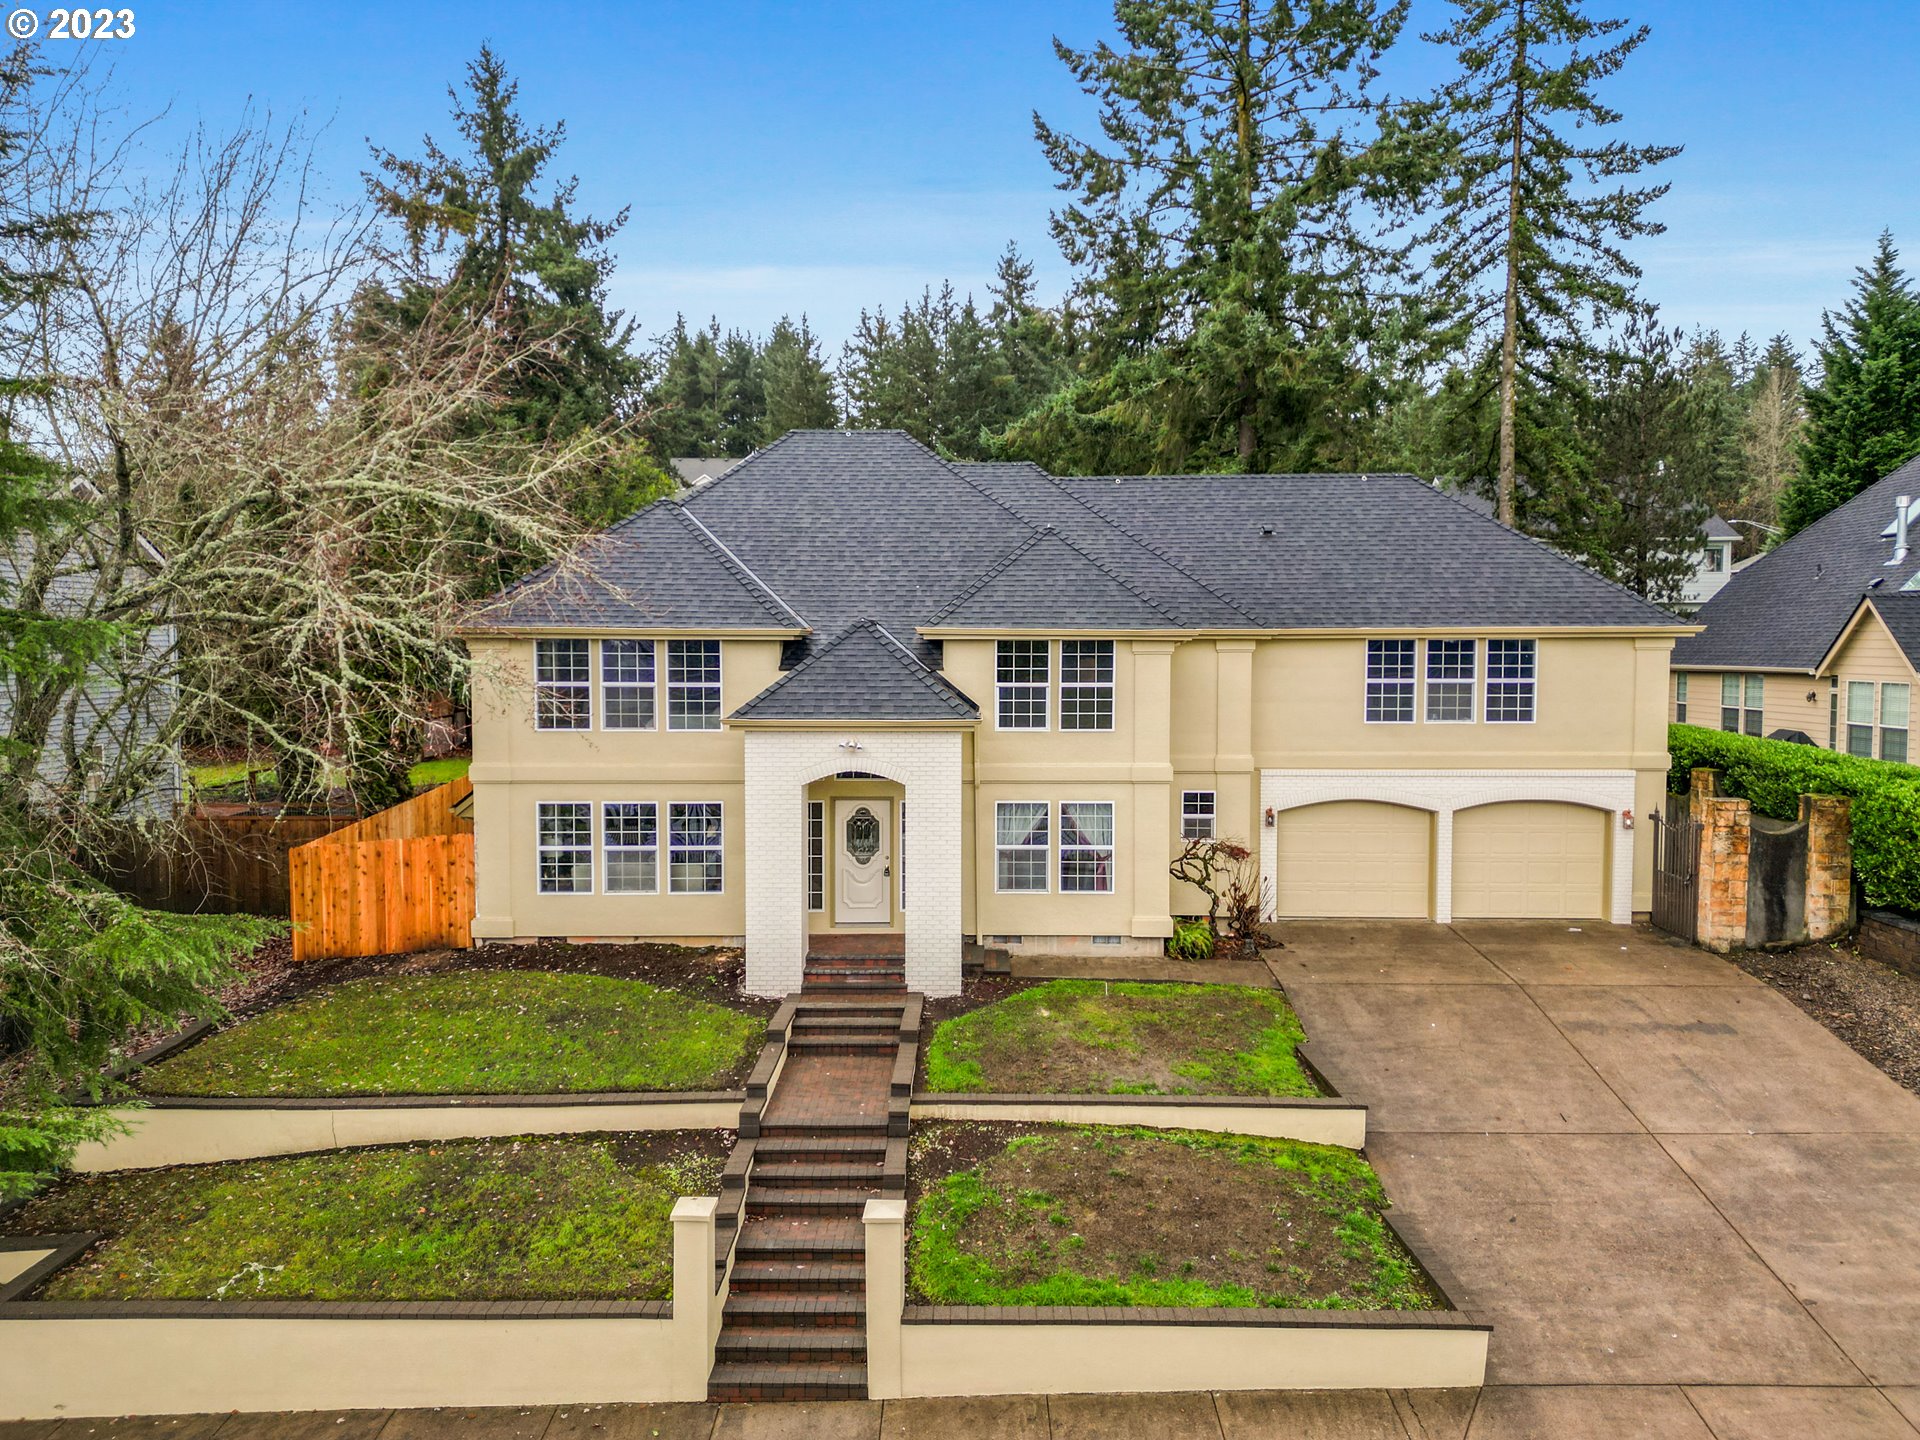 2010 NW SARAH AVE, Albany, OR 